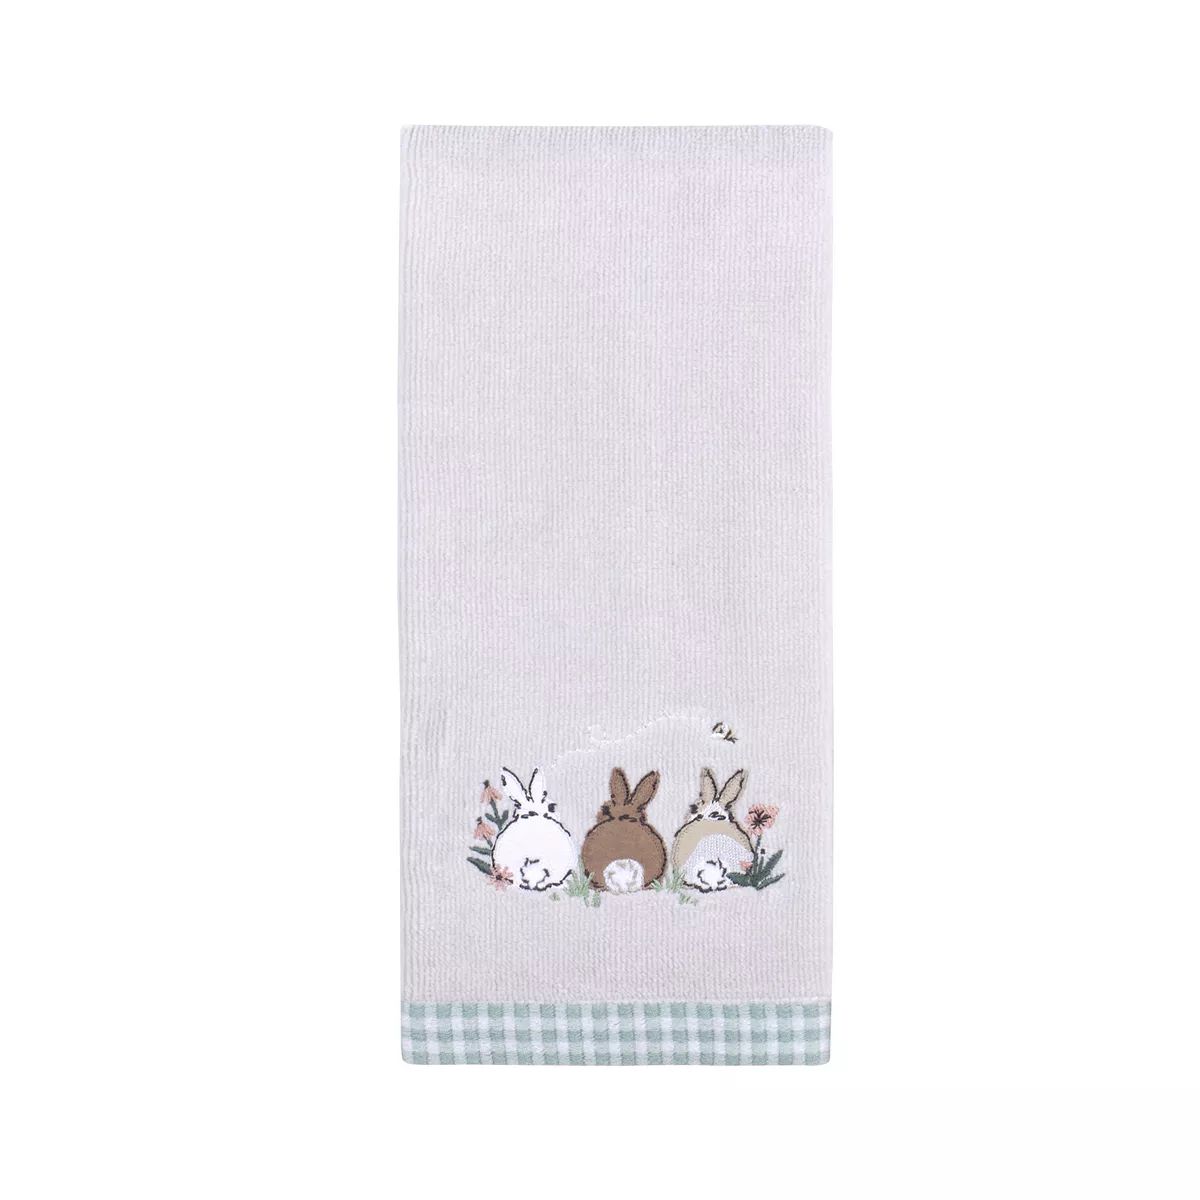 Celebrate Together™ Easter Bunny Trio Hand Towel | Kohl's